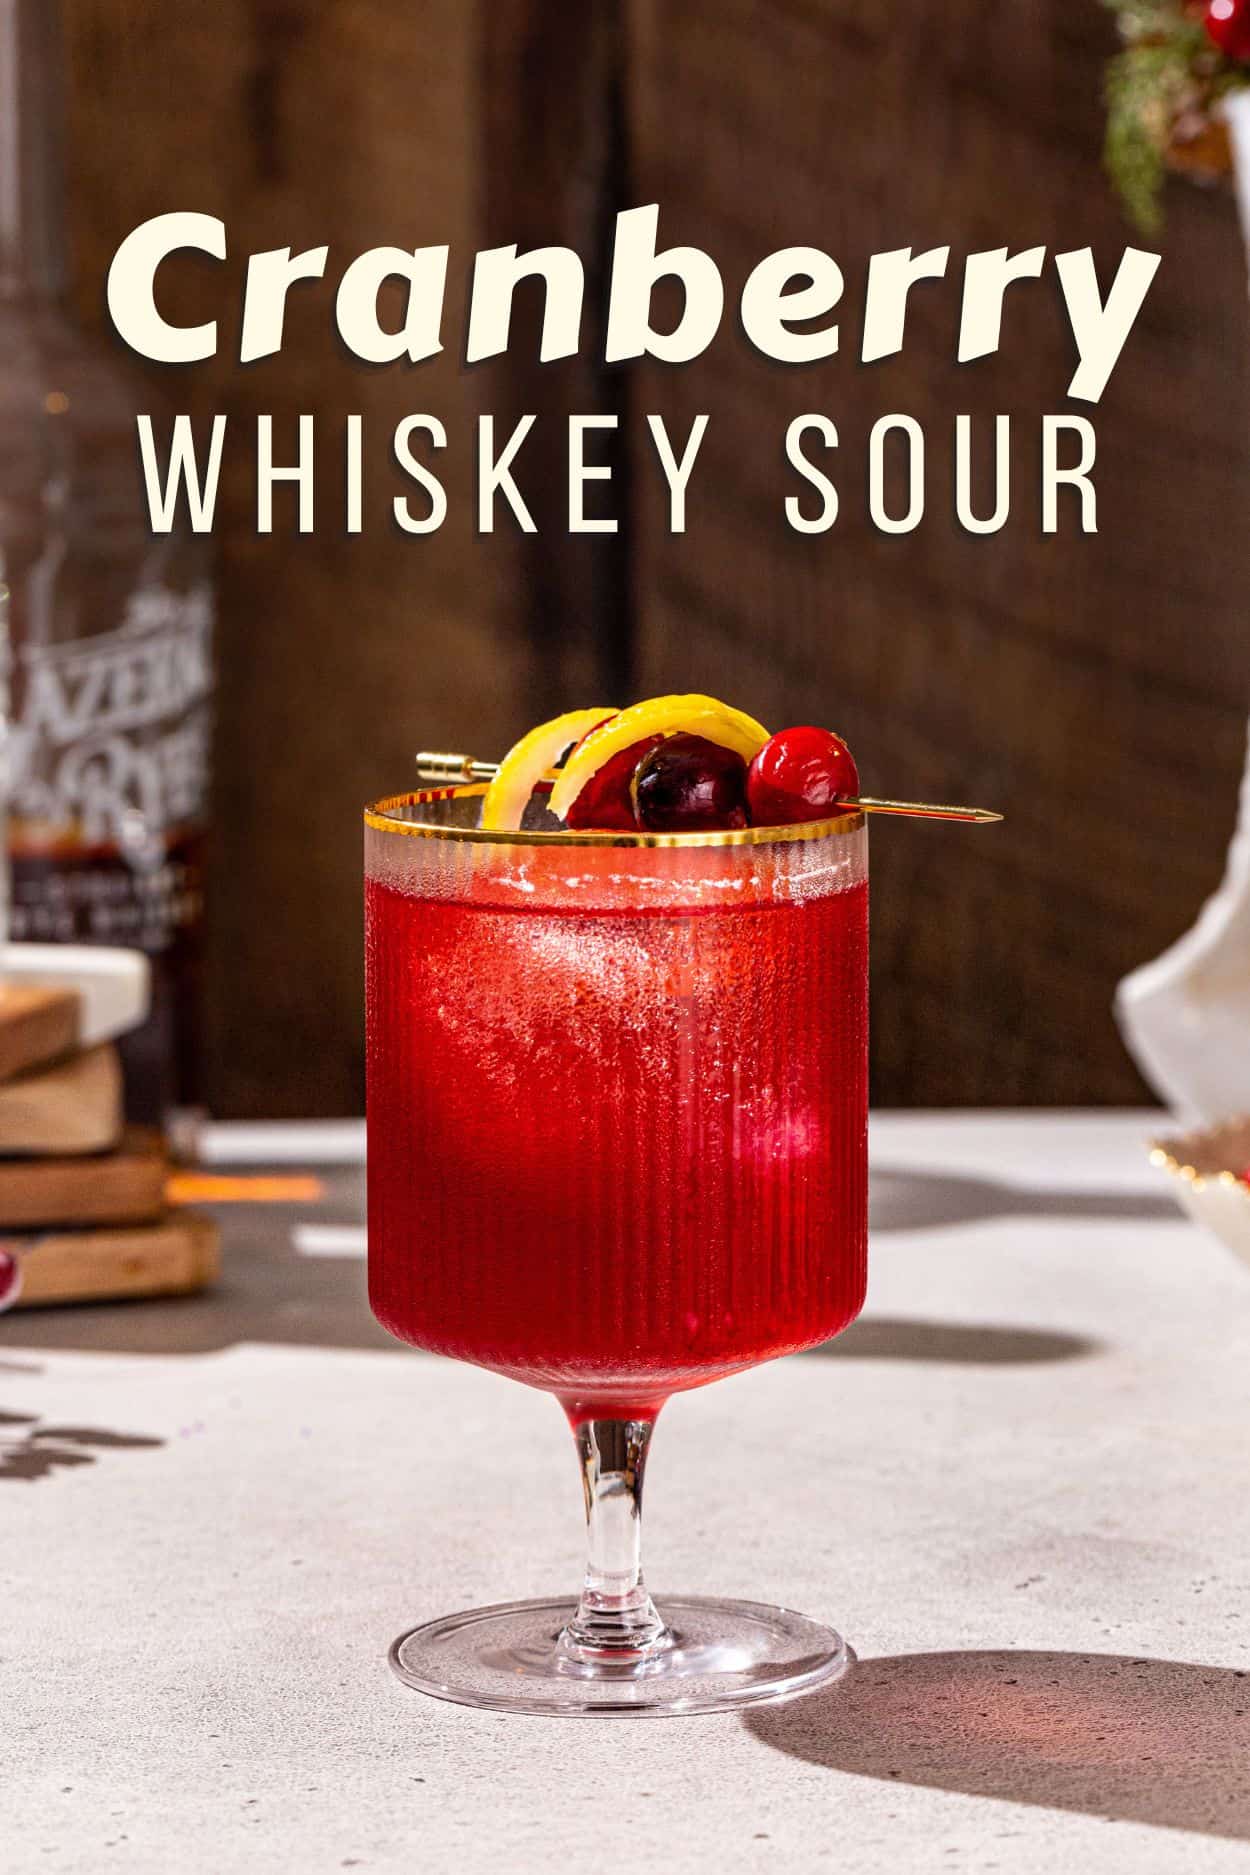 Side view of a Cranberry Whiskey Sour on a countertop. In the background a bottle of rye whiskey is visible. The drink itself is bright red with a cranberry and lemon peel garnish. Bold text at the top says “Cranberry whiskey sour”.